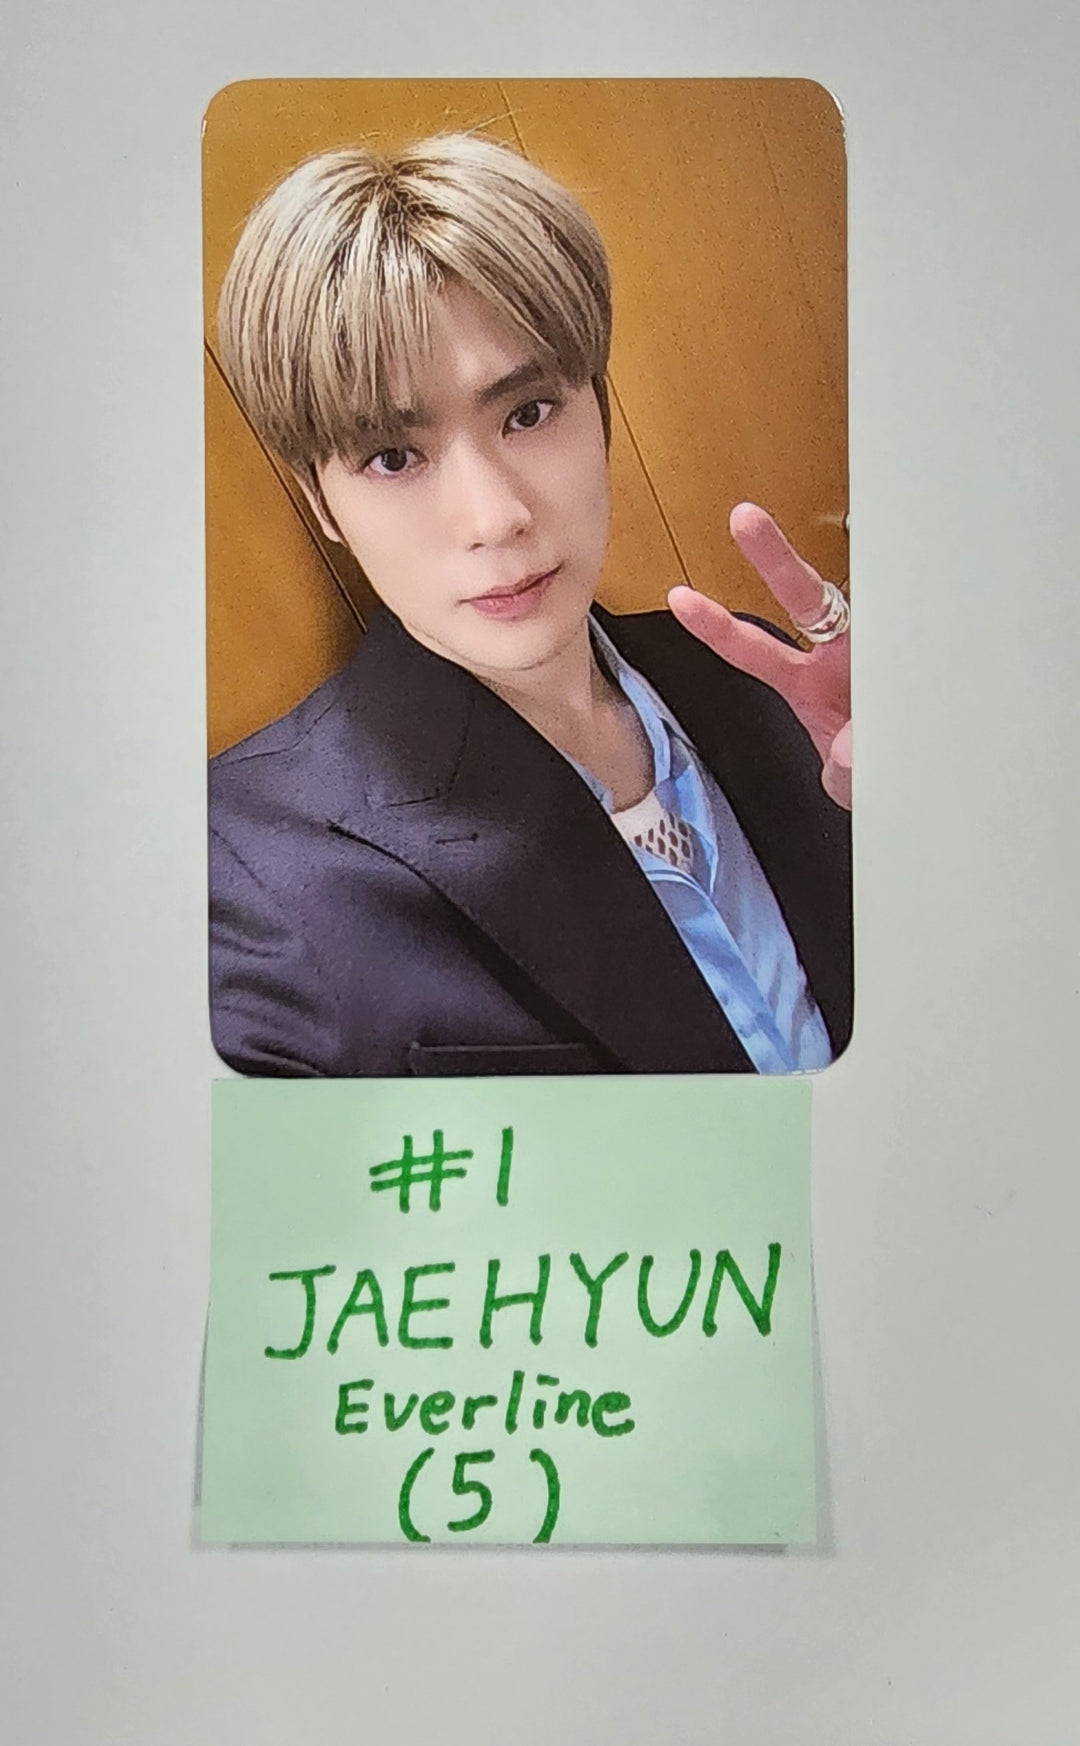 NCT 도재정 "Perfume" - Everline Fansign Event Photocard Round 2